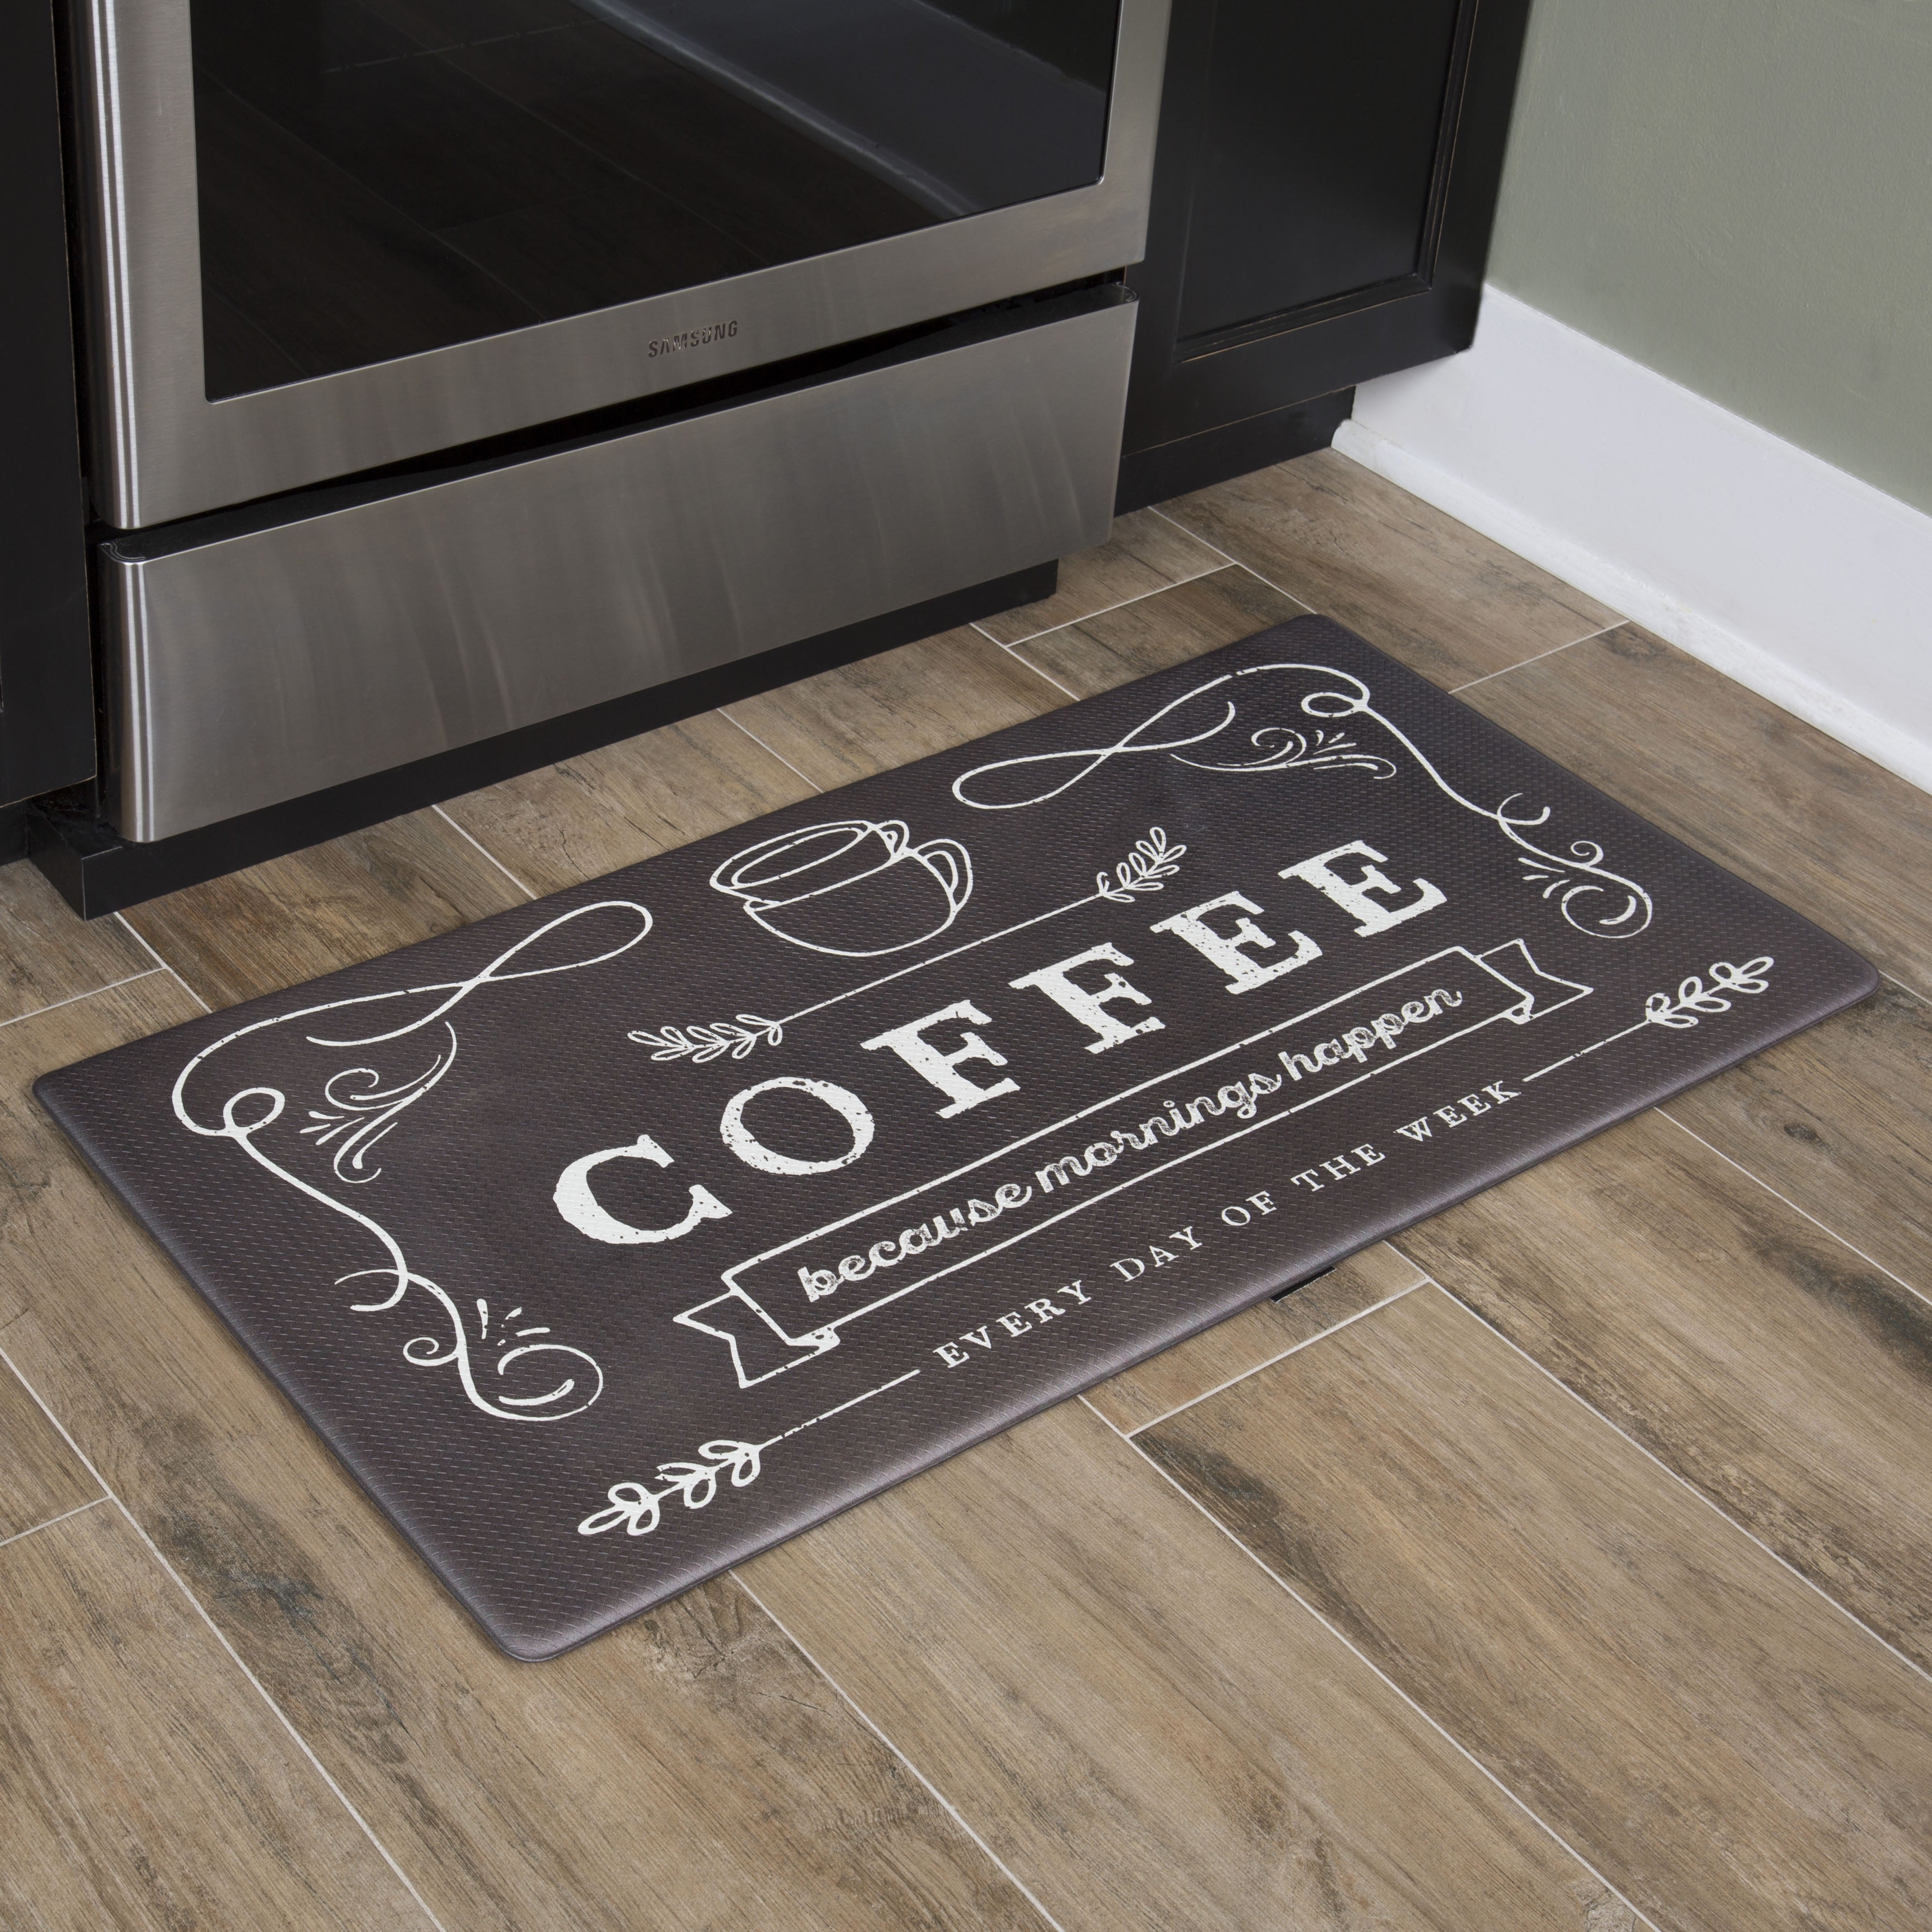 Shoppers Say This Bestselling Kitchen Mat Is as Soft as a 'Squishy